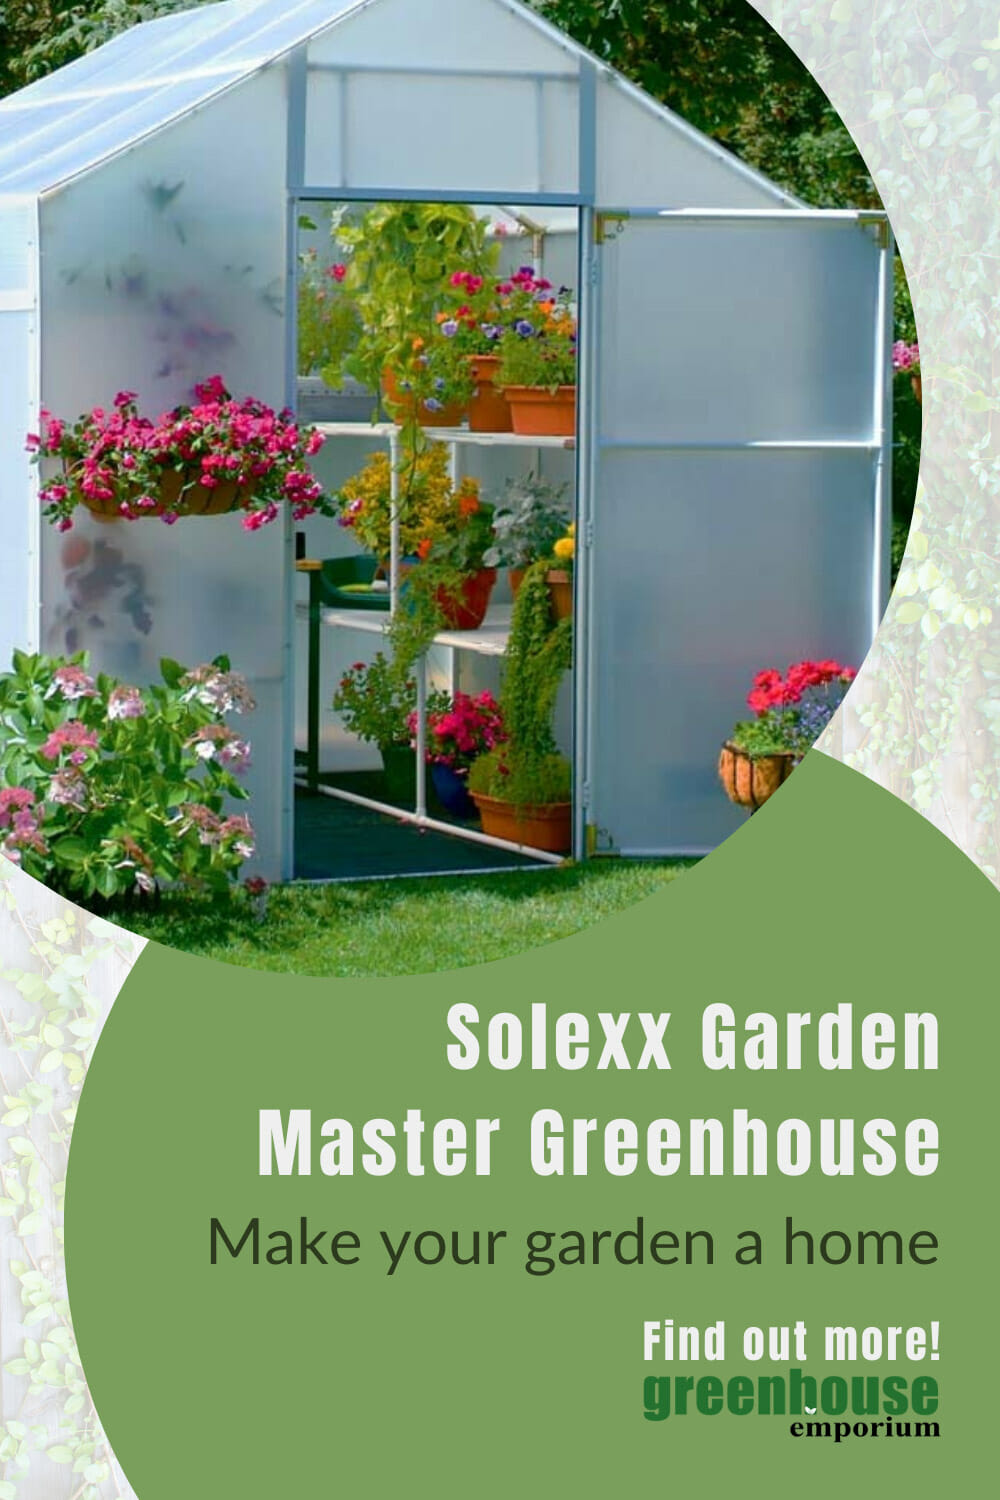 Image of classic greenhouse with Solexx panels with text: Solexx Garden Master Greenhouse Make Your Garden a Home